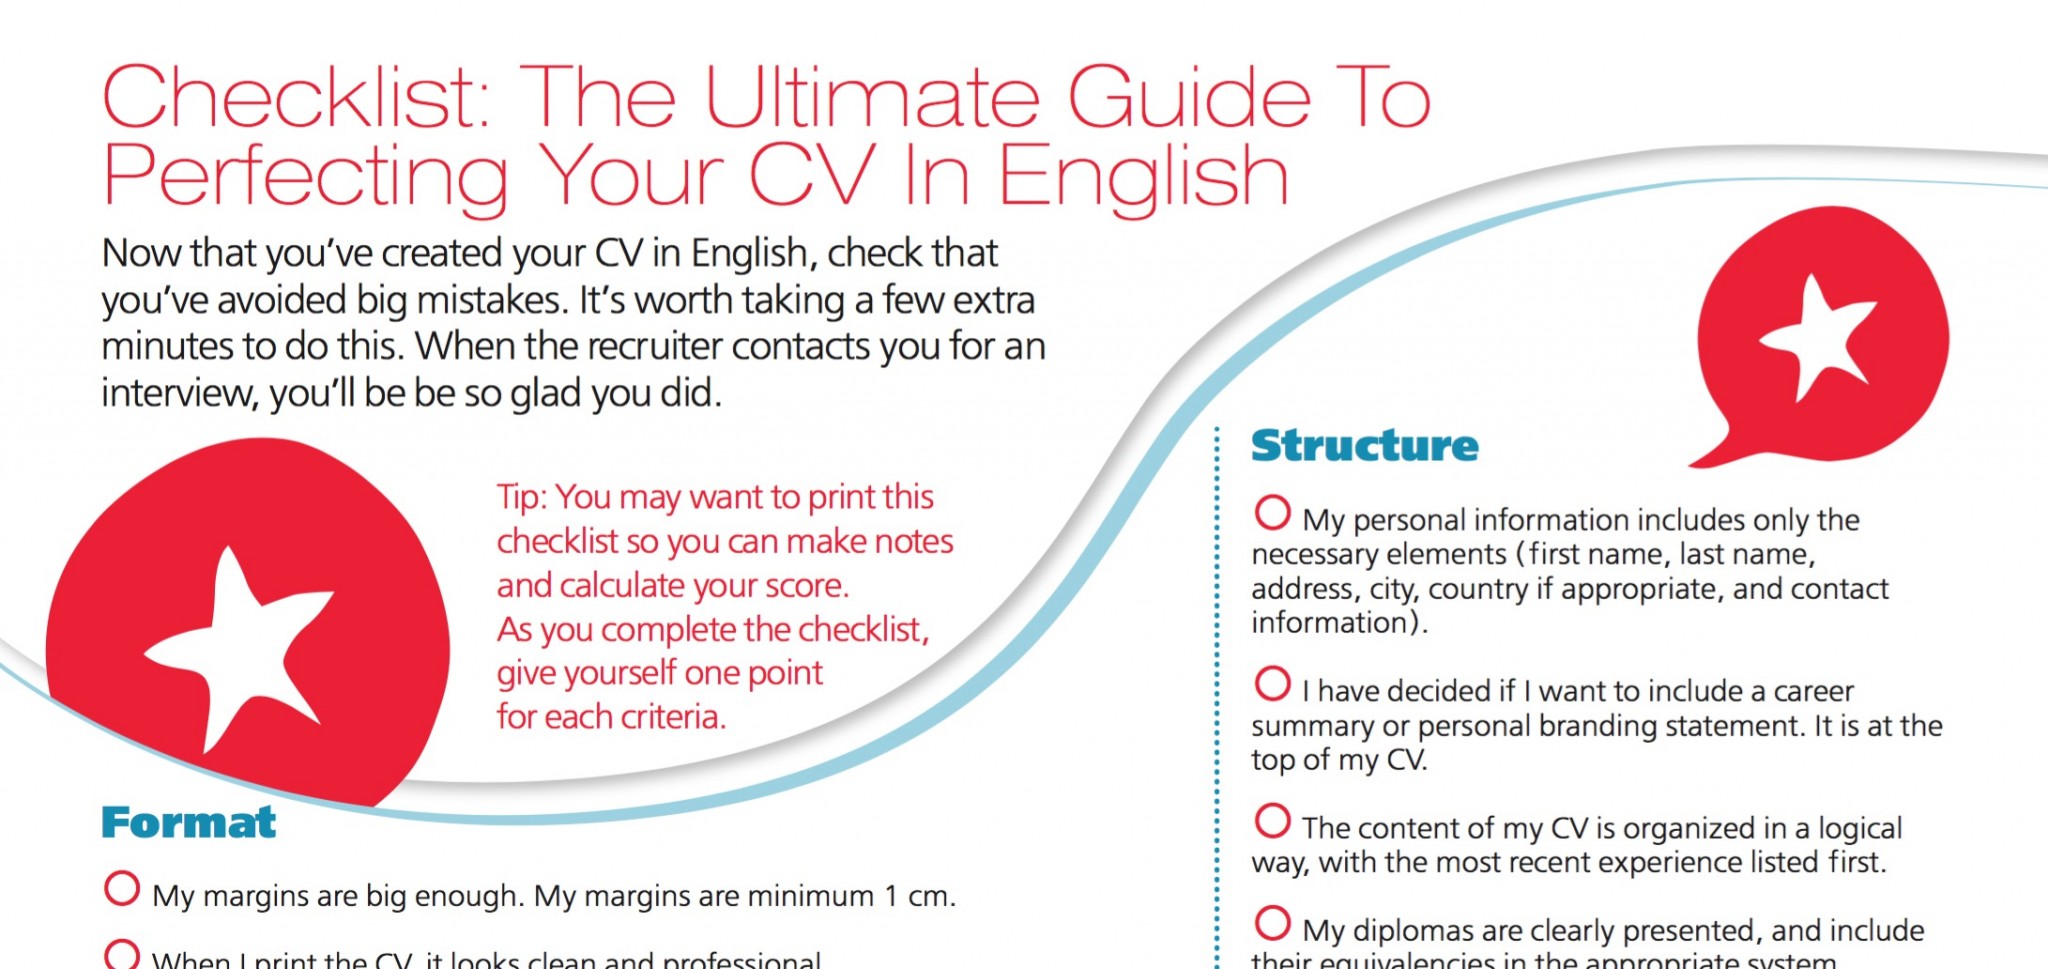 en the ultimate guide to a perfect cv in english     fr